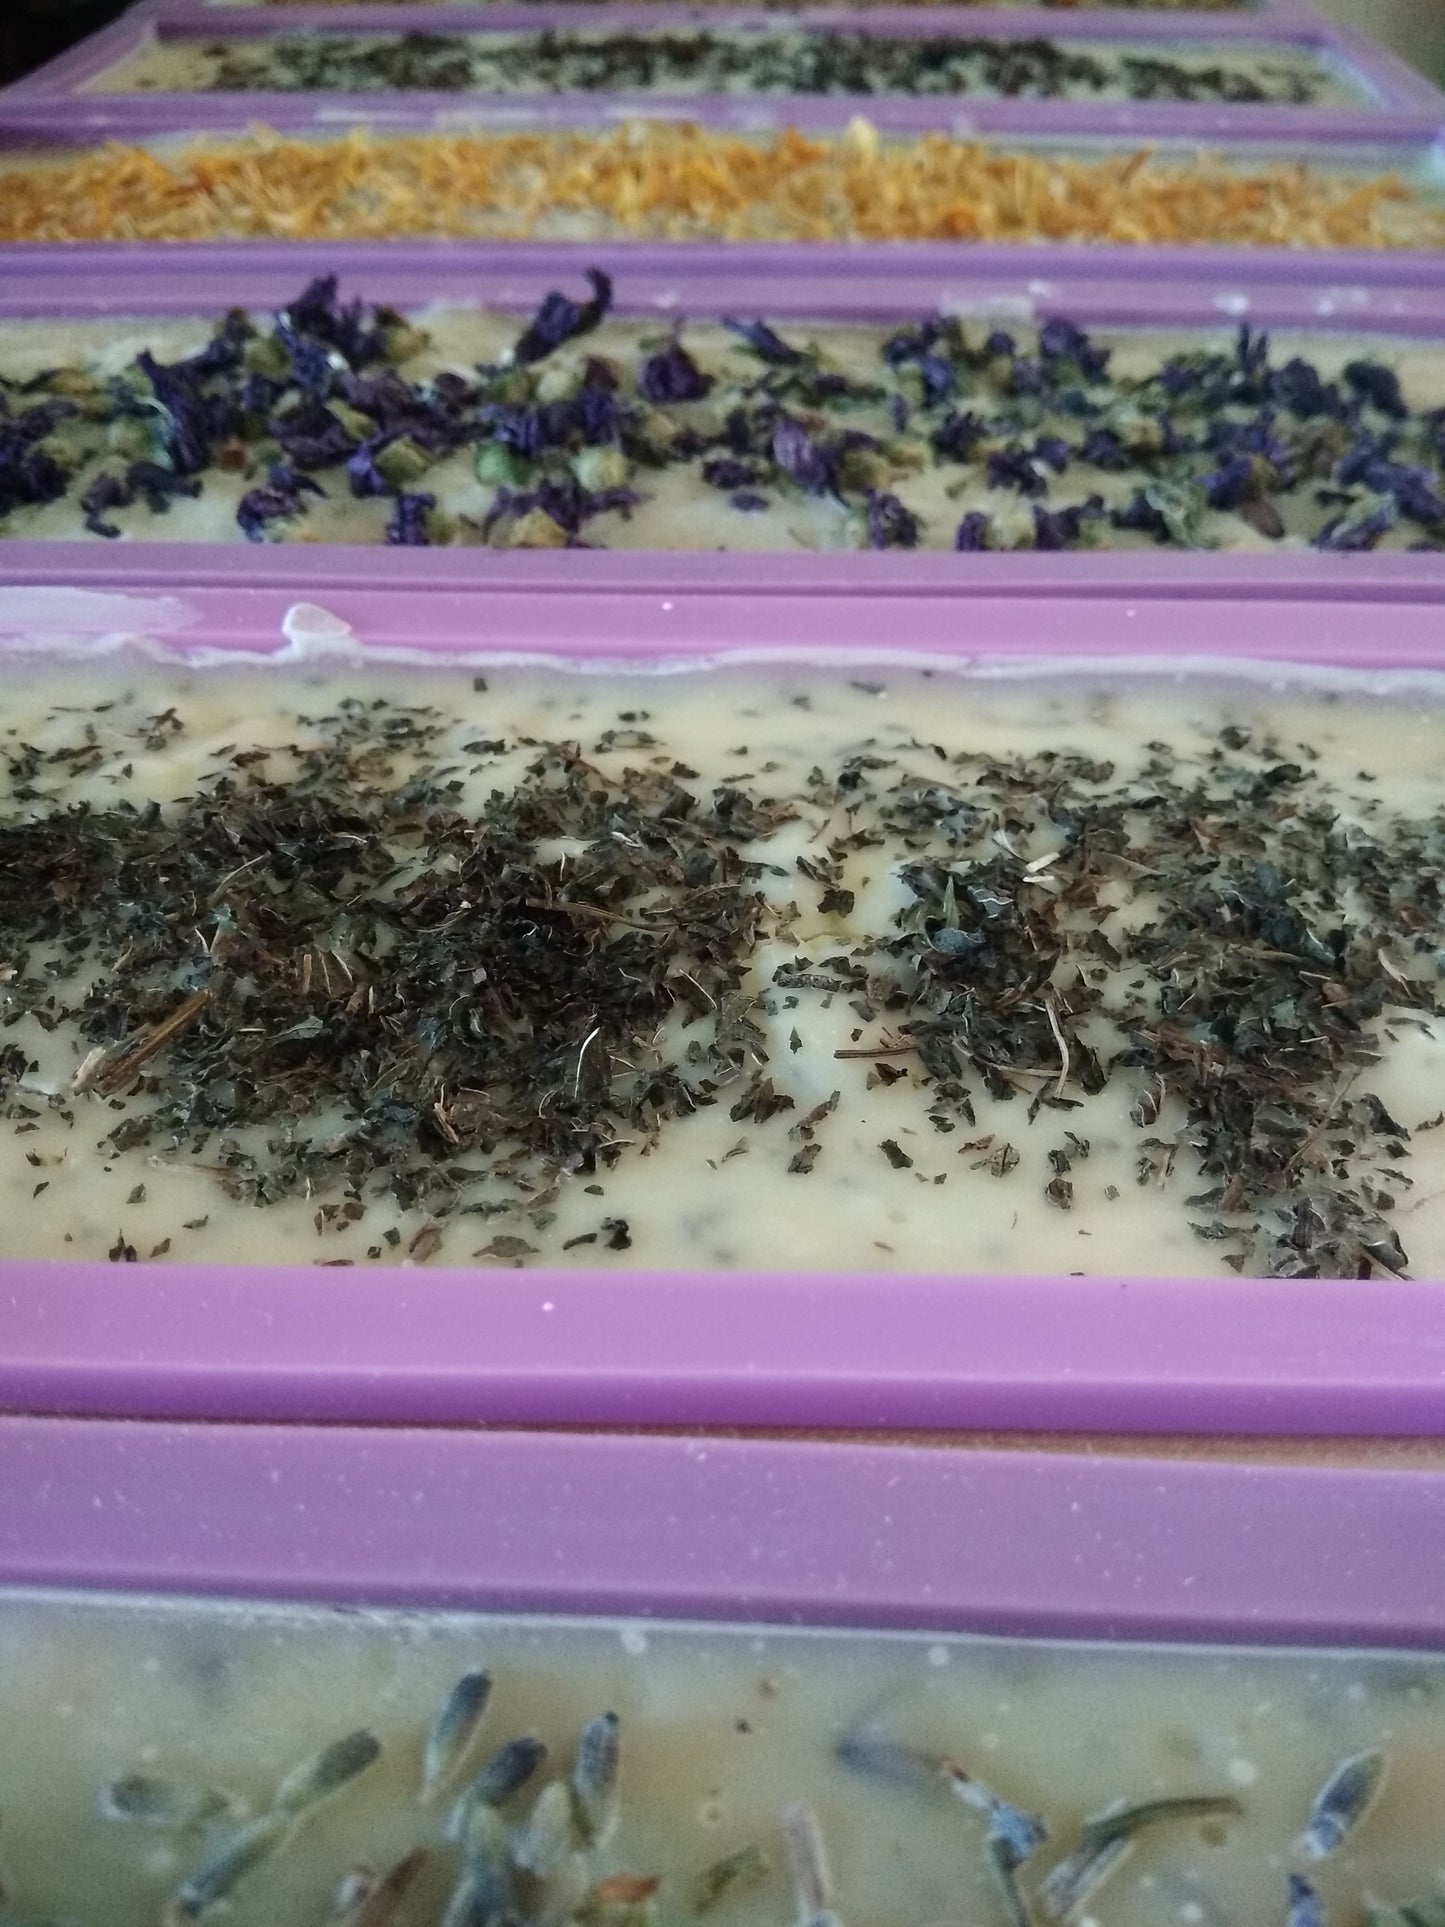 MINI BUNDLE - 4 x 90g Organic Certified Solid Soap - Lavender & Rosemary with Lavender flowers - Earthsenseorganics